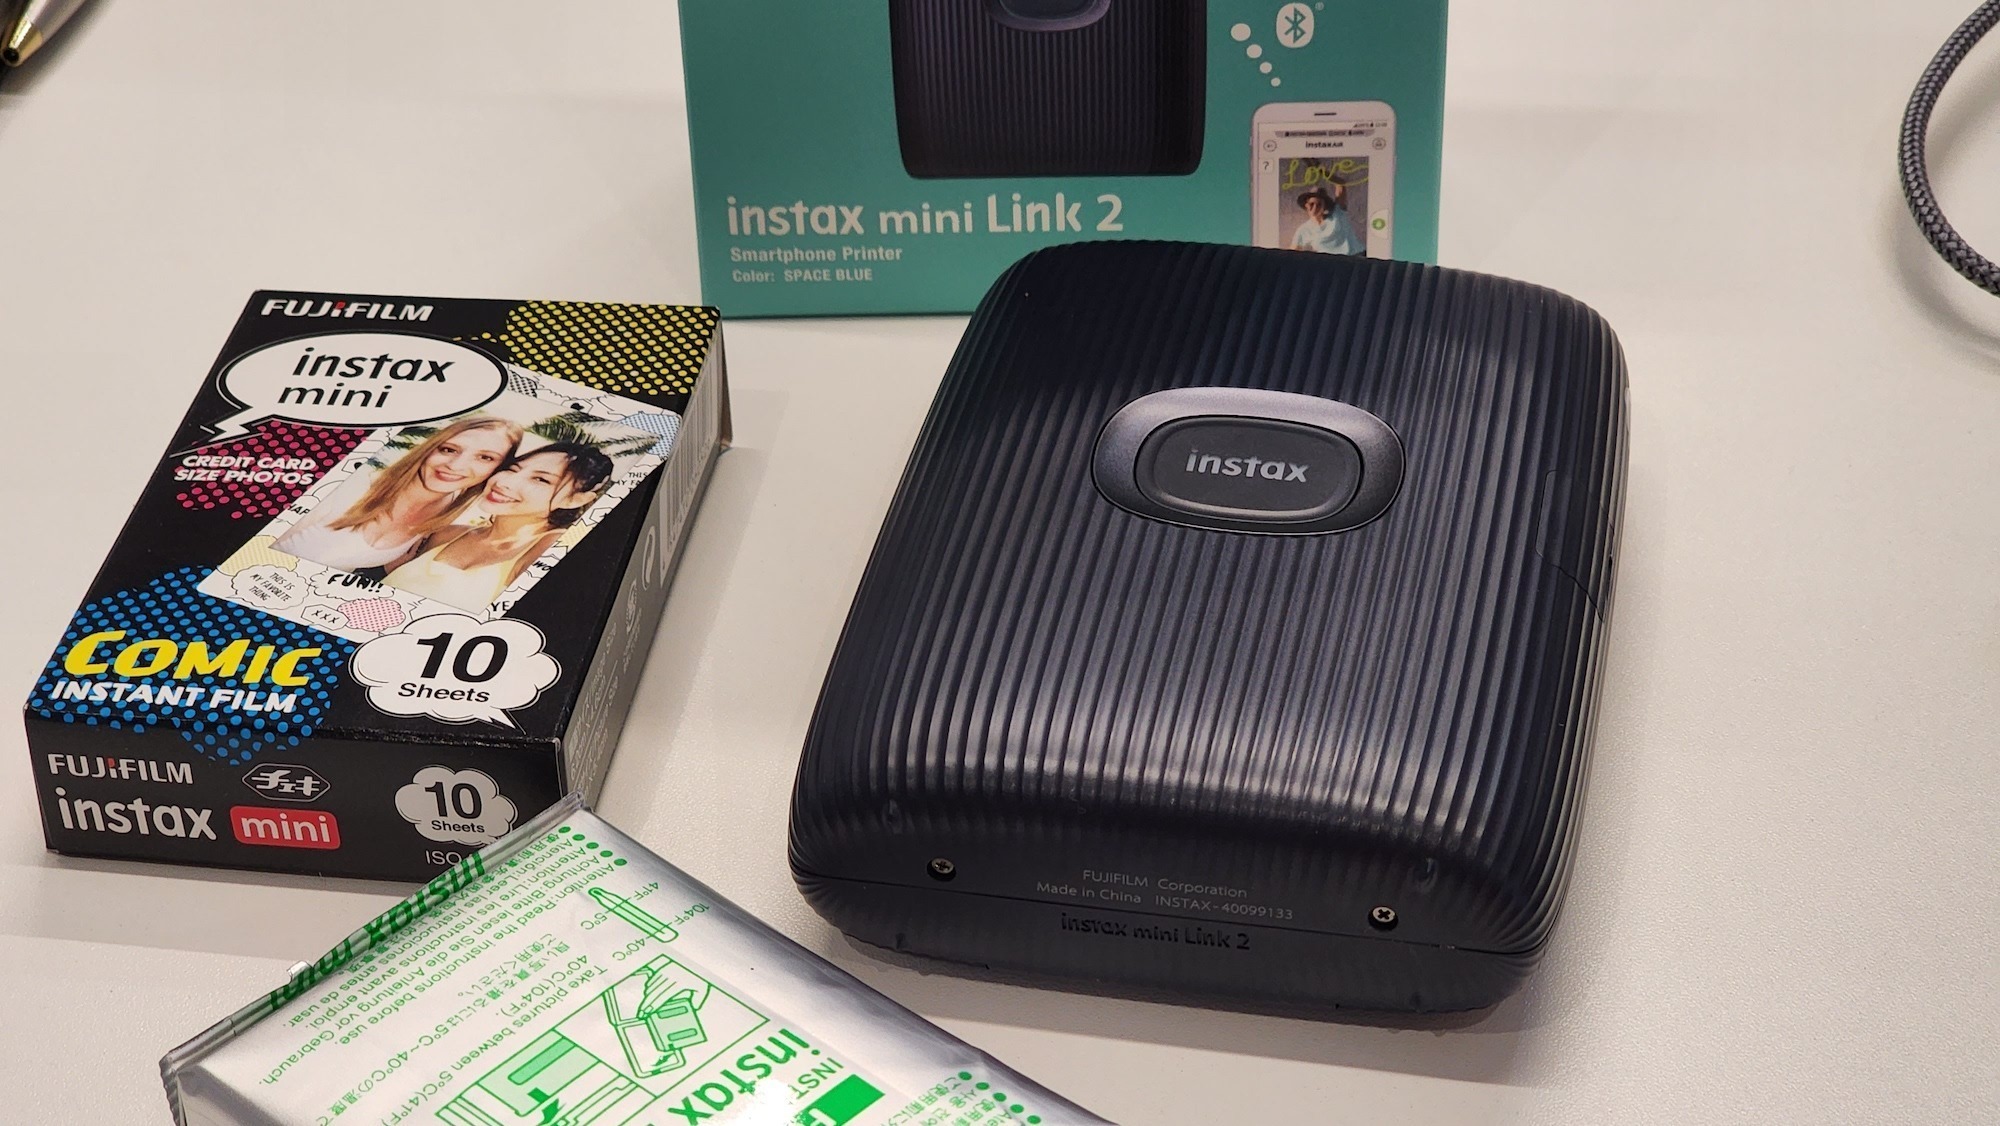 instax mini Link 2 Printer by Fujifilm Online, THE ICONIC